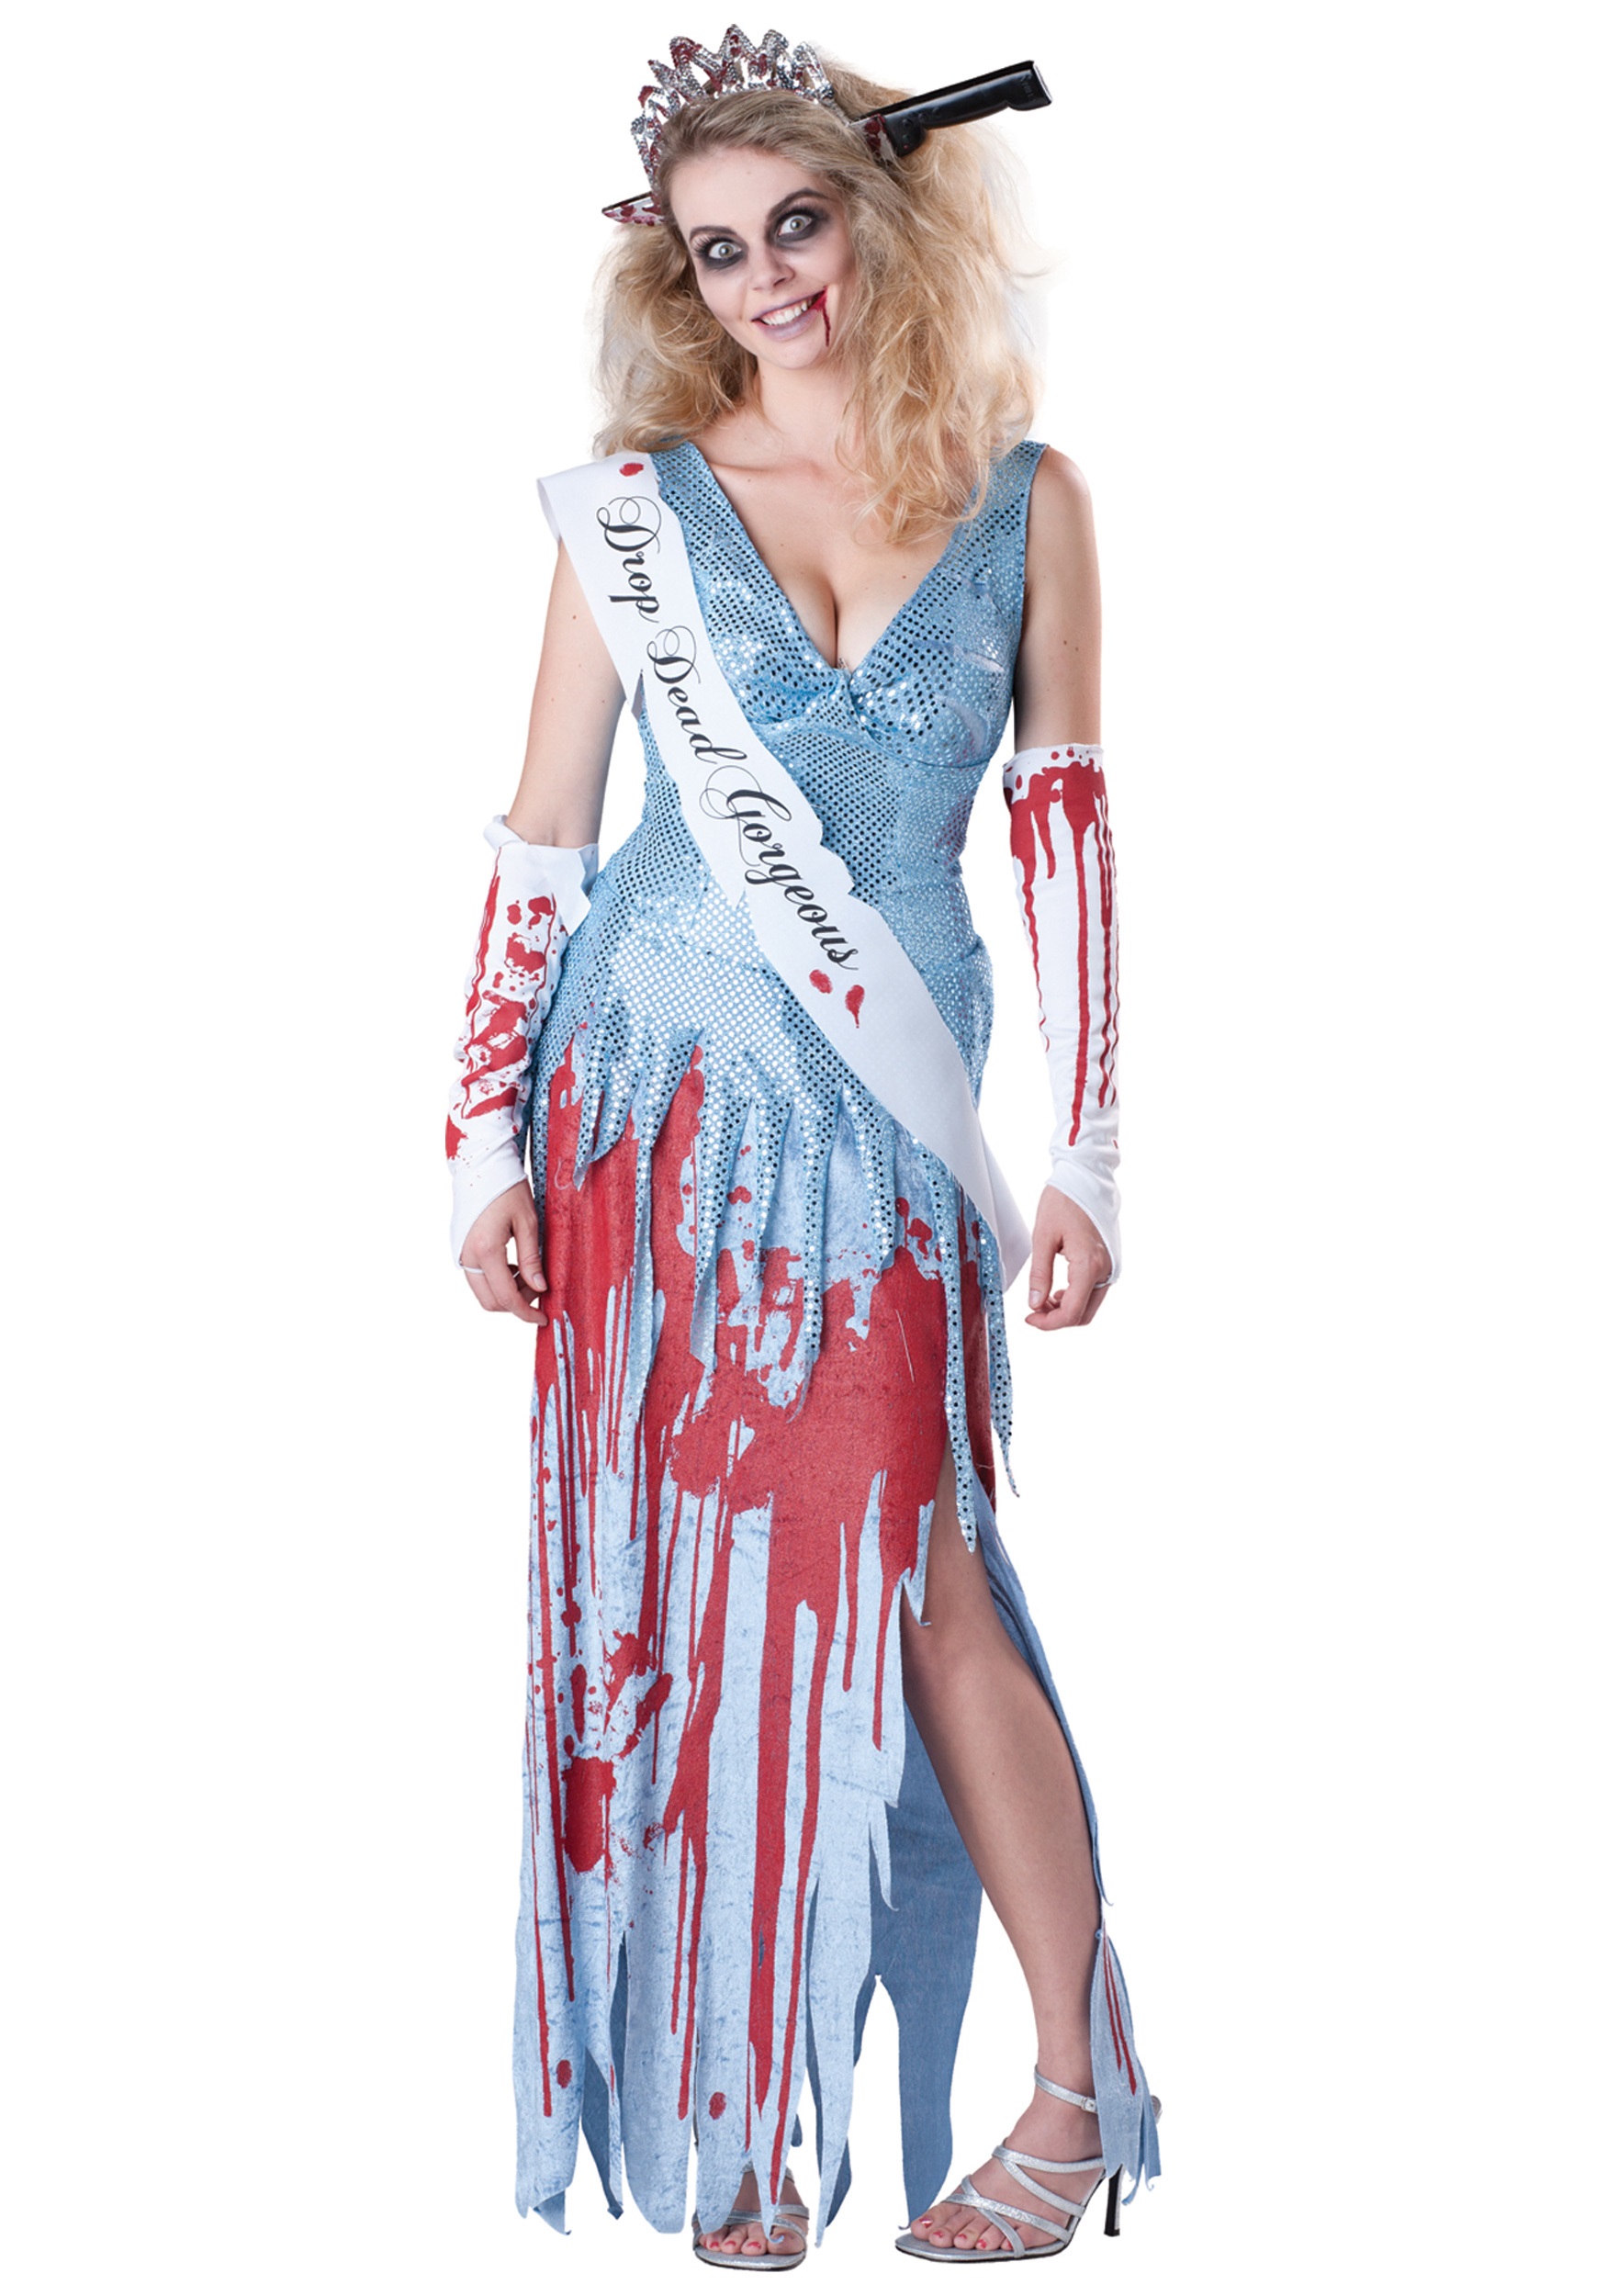 Drop Dead Prom Queen Costume with Free Shipping in U.S., UK, Europe, Canada...